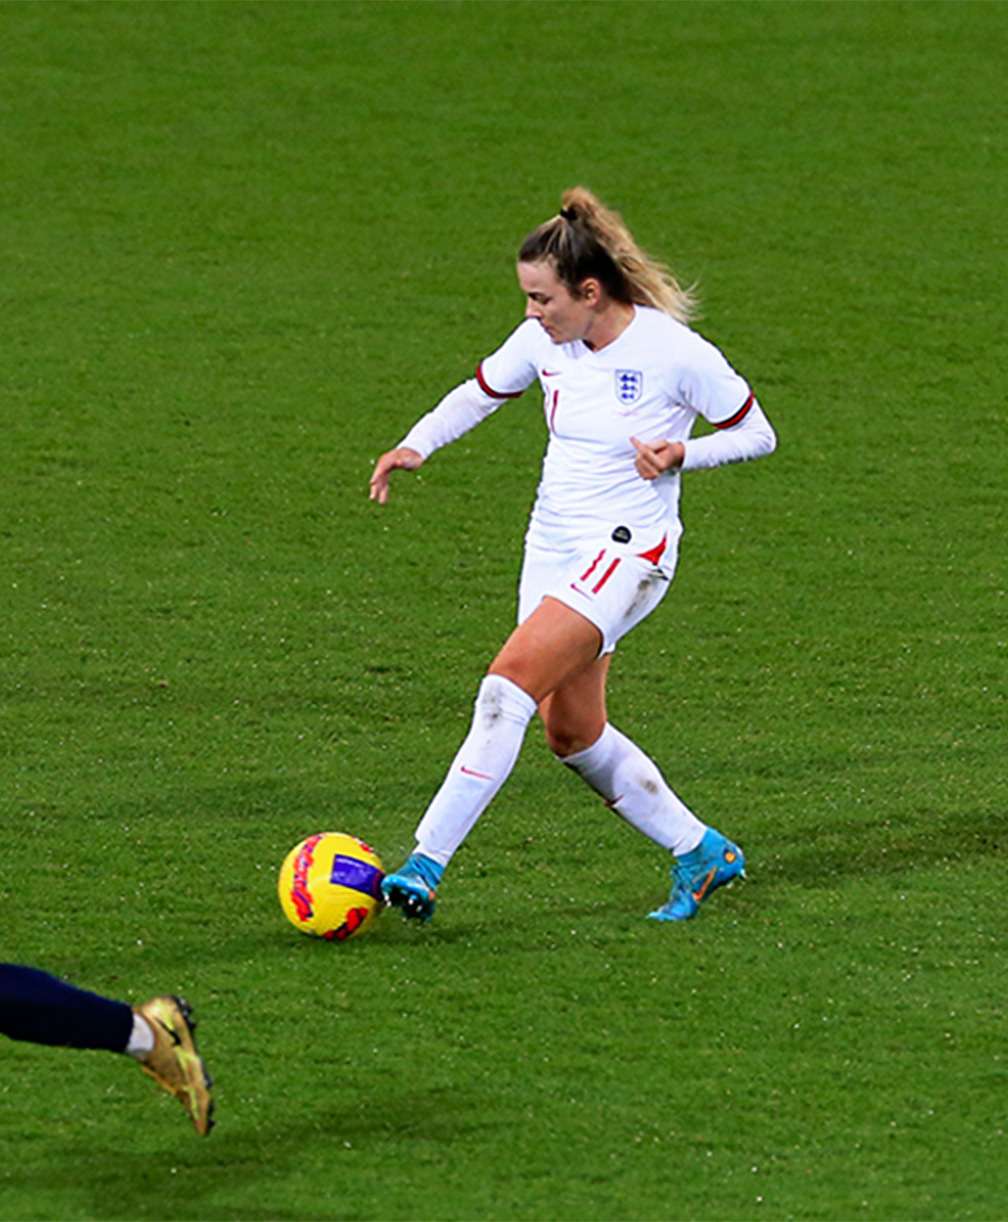 A member of the England womans team passes the ball during a match